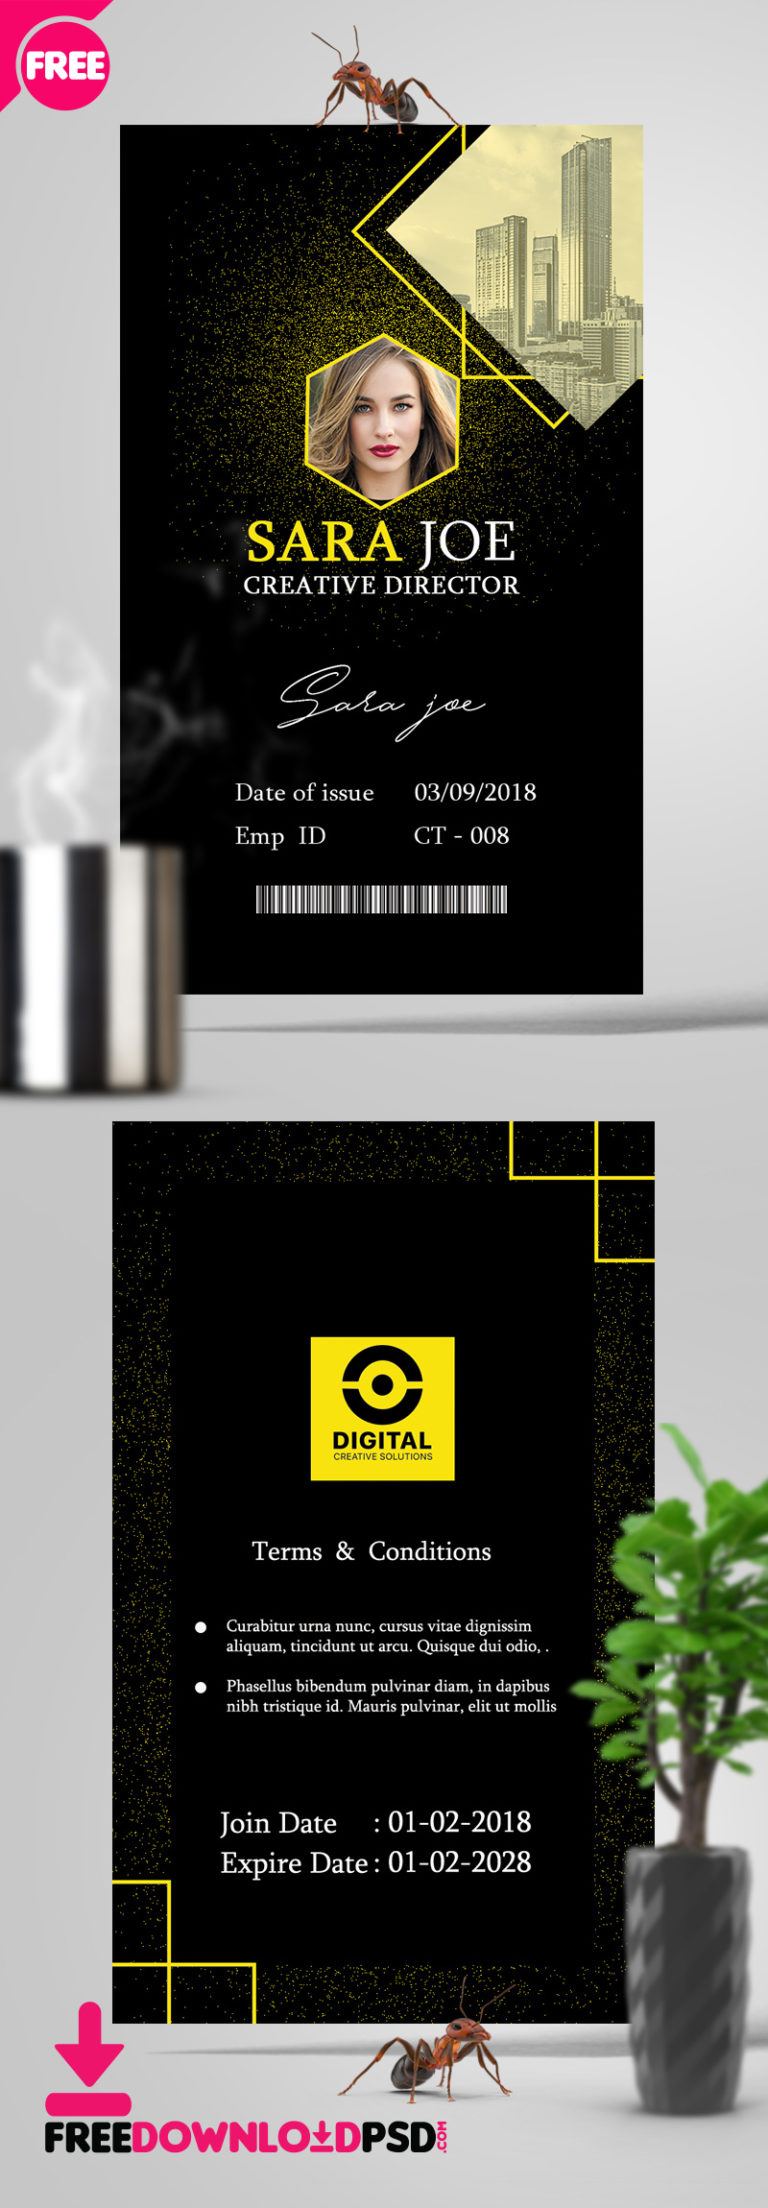 id card design psd template free download